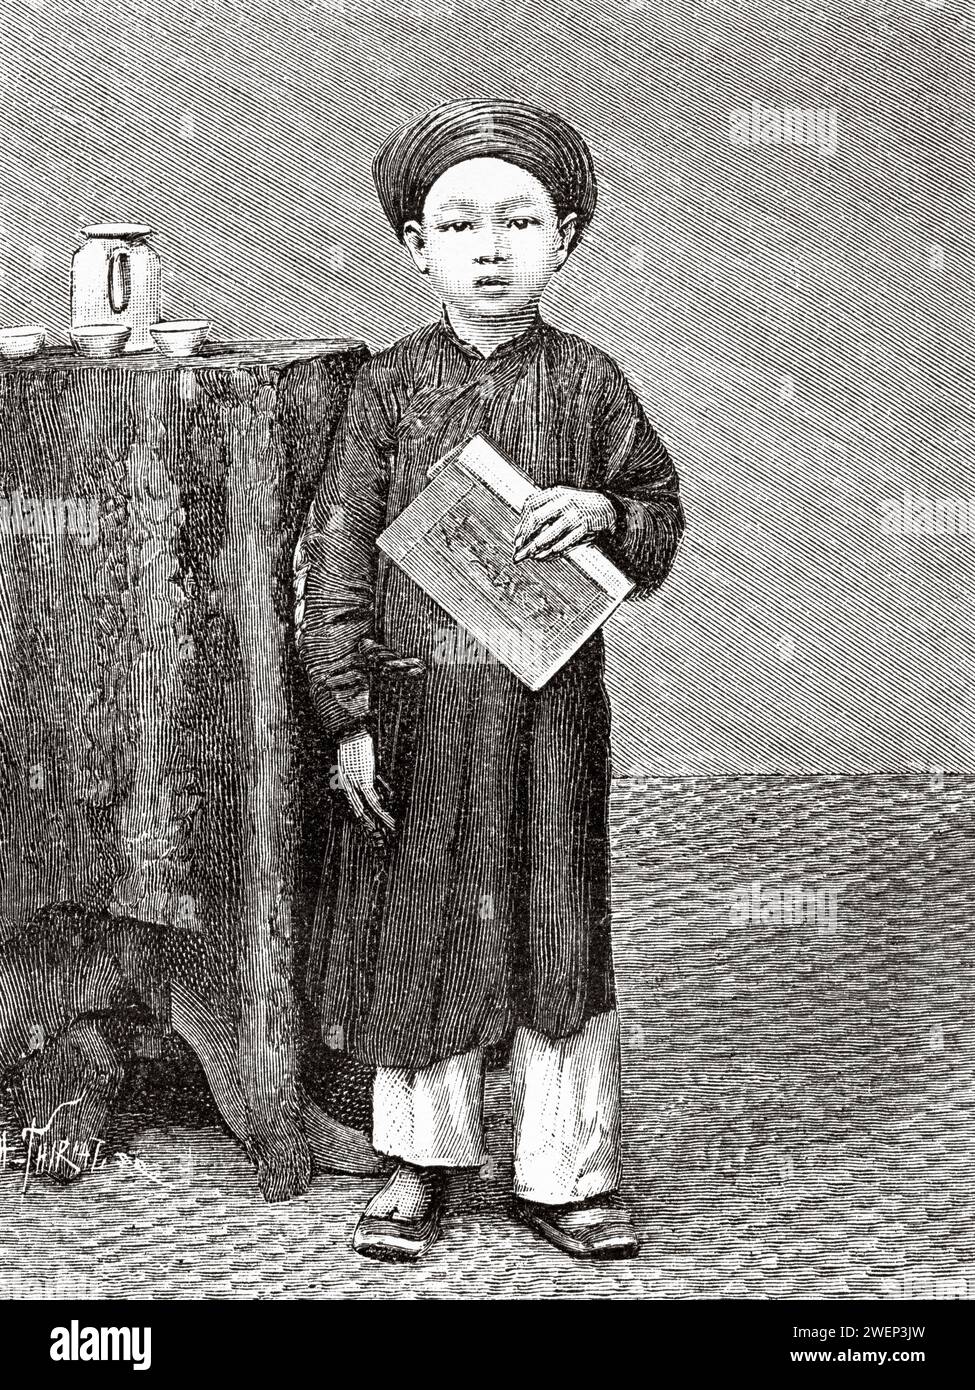 French school student, Vietnam, Indochina, Asia. Thirty months in Tonkin 1885 by Doctor Charles Edouard Hocquard (1853 - 1911) Stock Photo